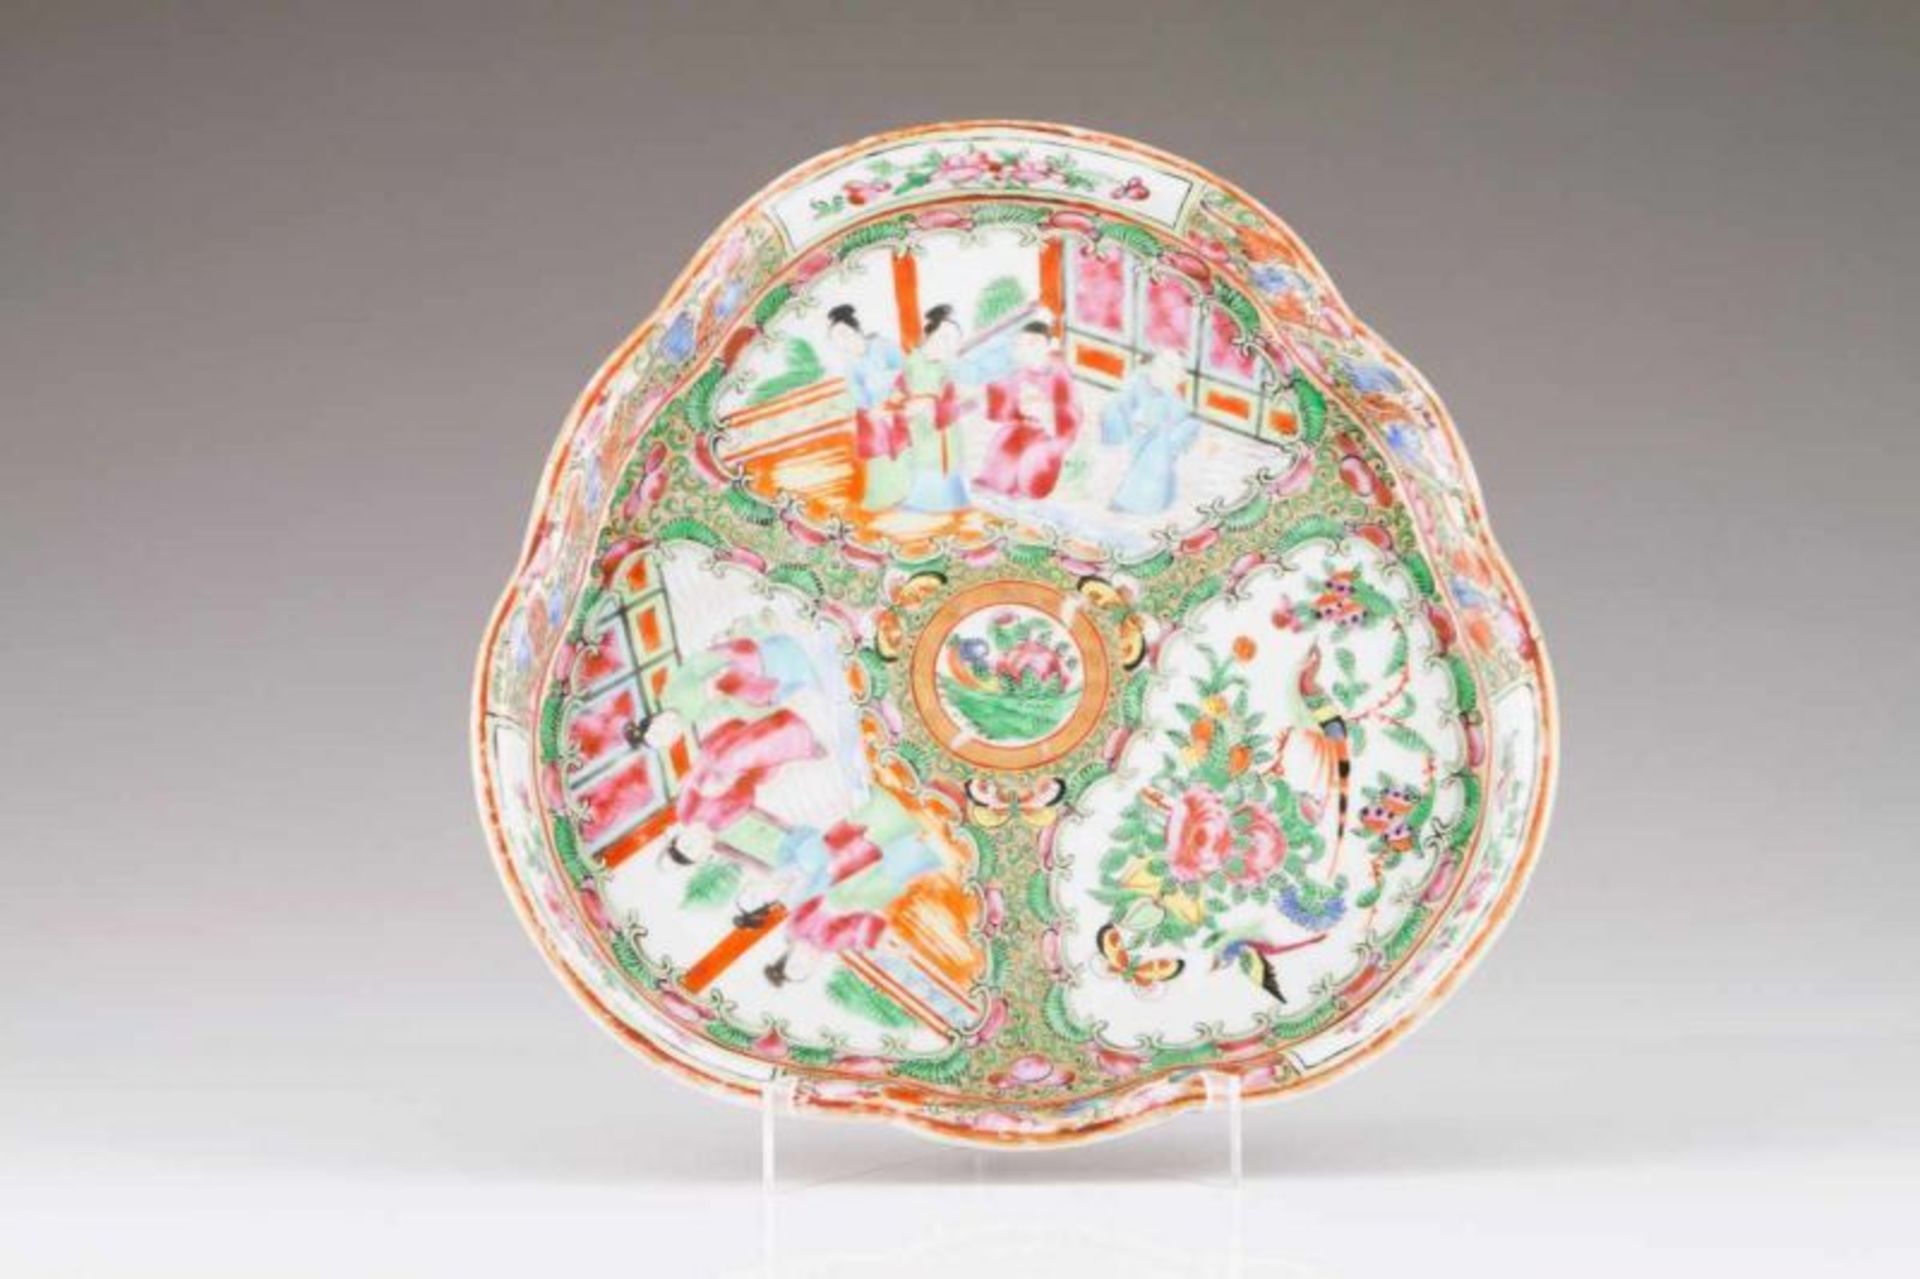 A scalloped saucer Chinese porcelain Polychrome and gilt Mandarin decoration depicting Chinese